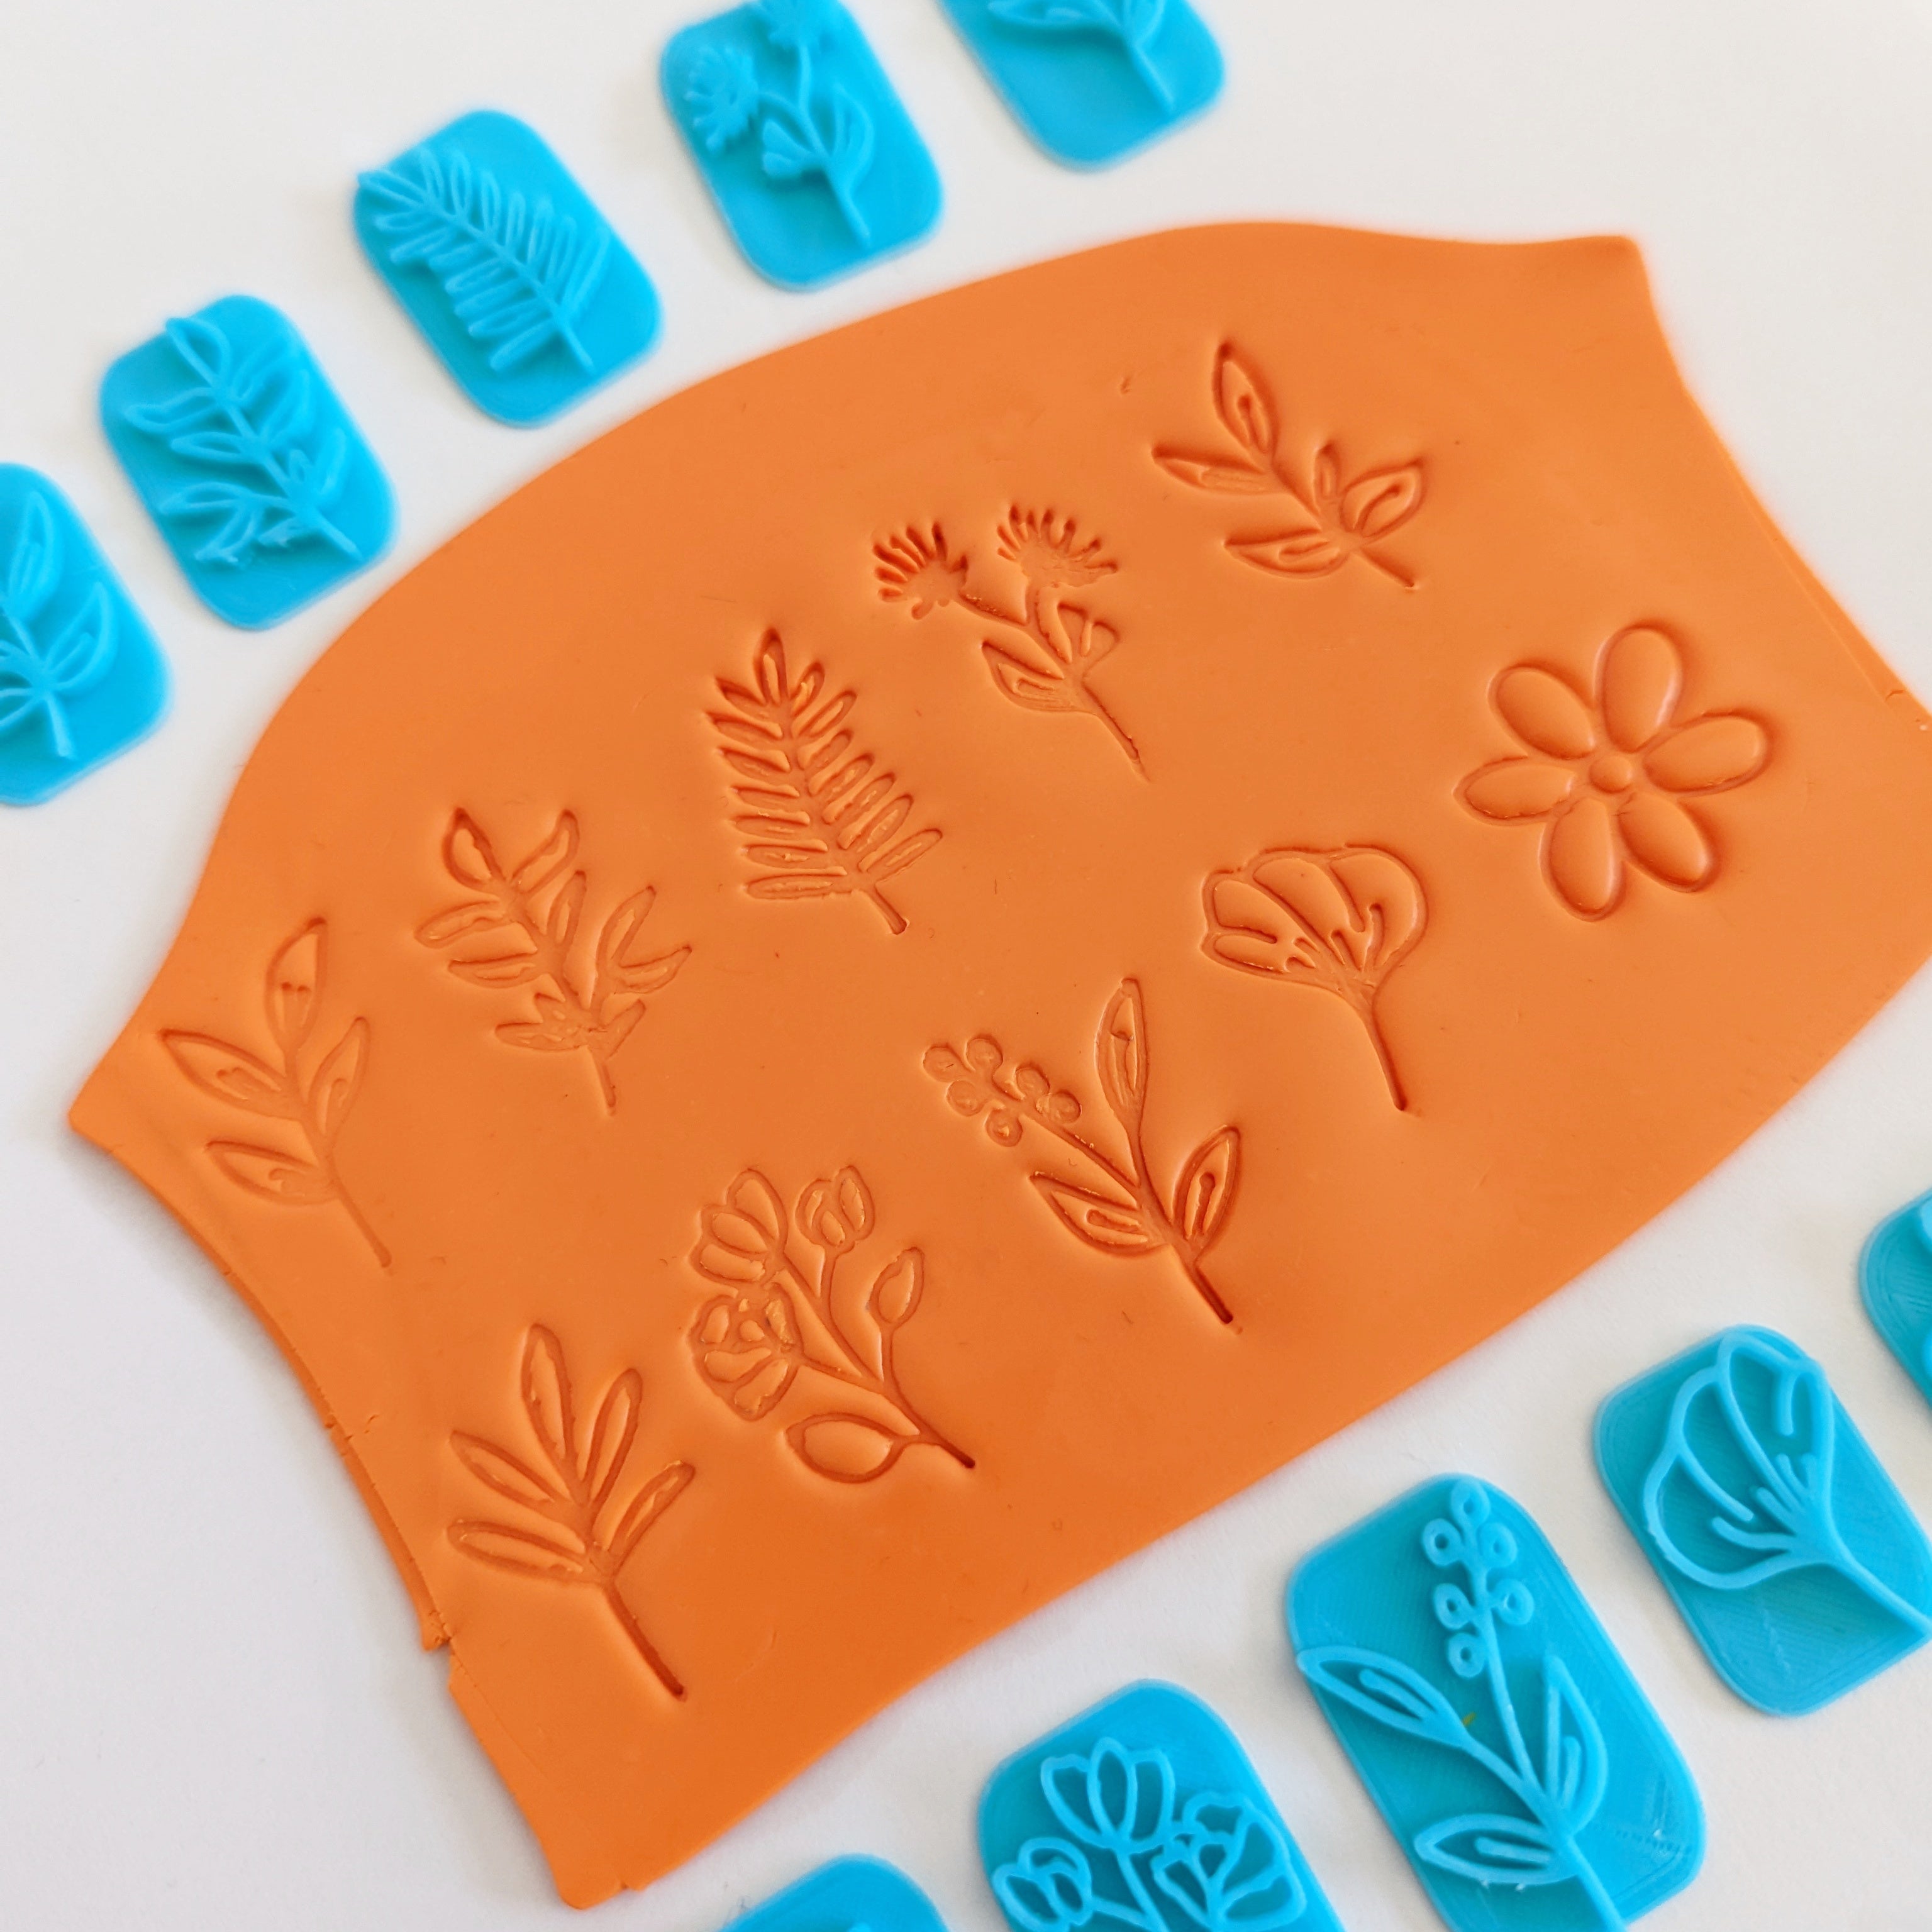 Botanical Clay Stamps